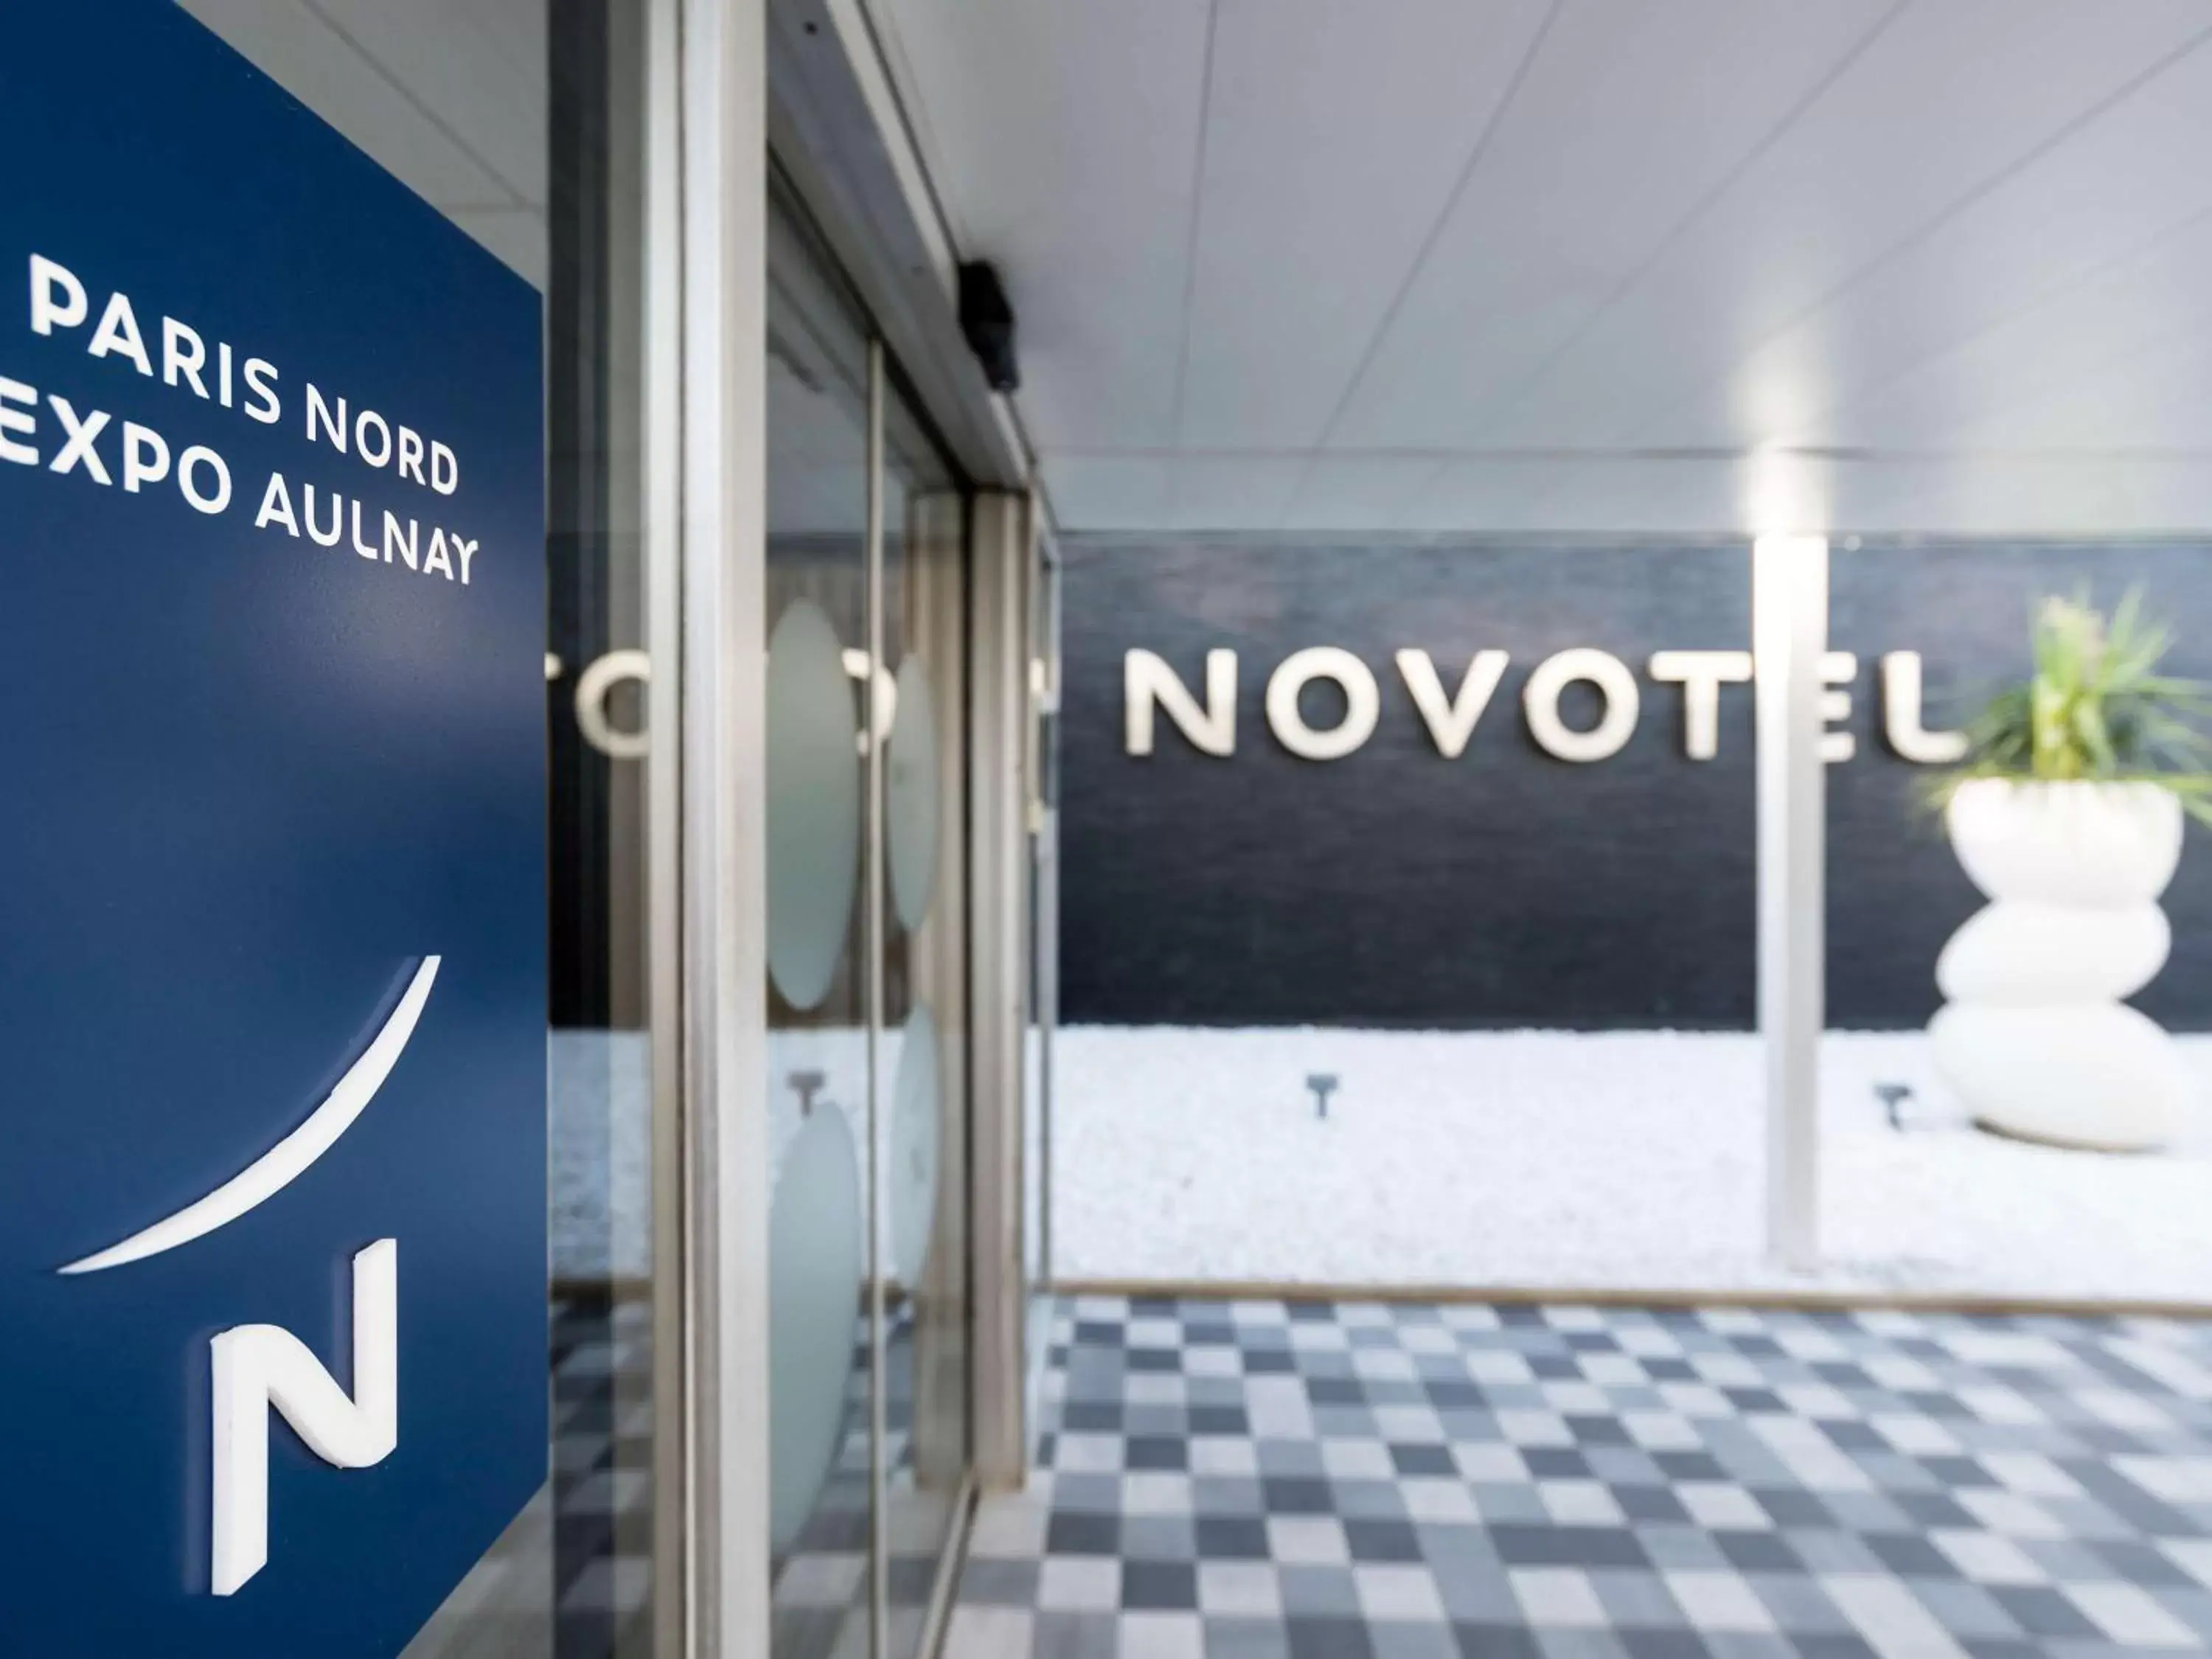 Property building, Logo/Certificate/Sign/Award in Novotel Paris Nord Expo Aulnay